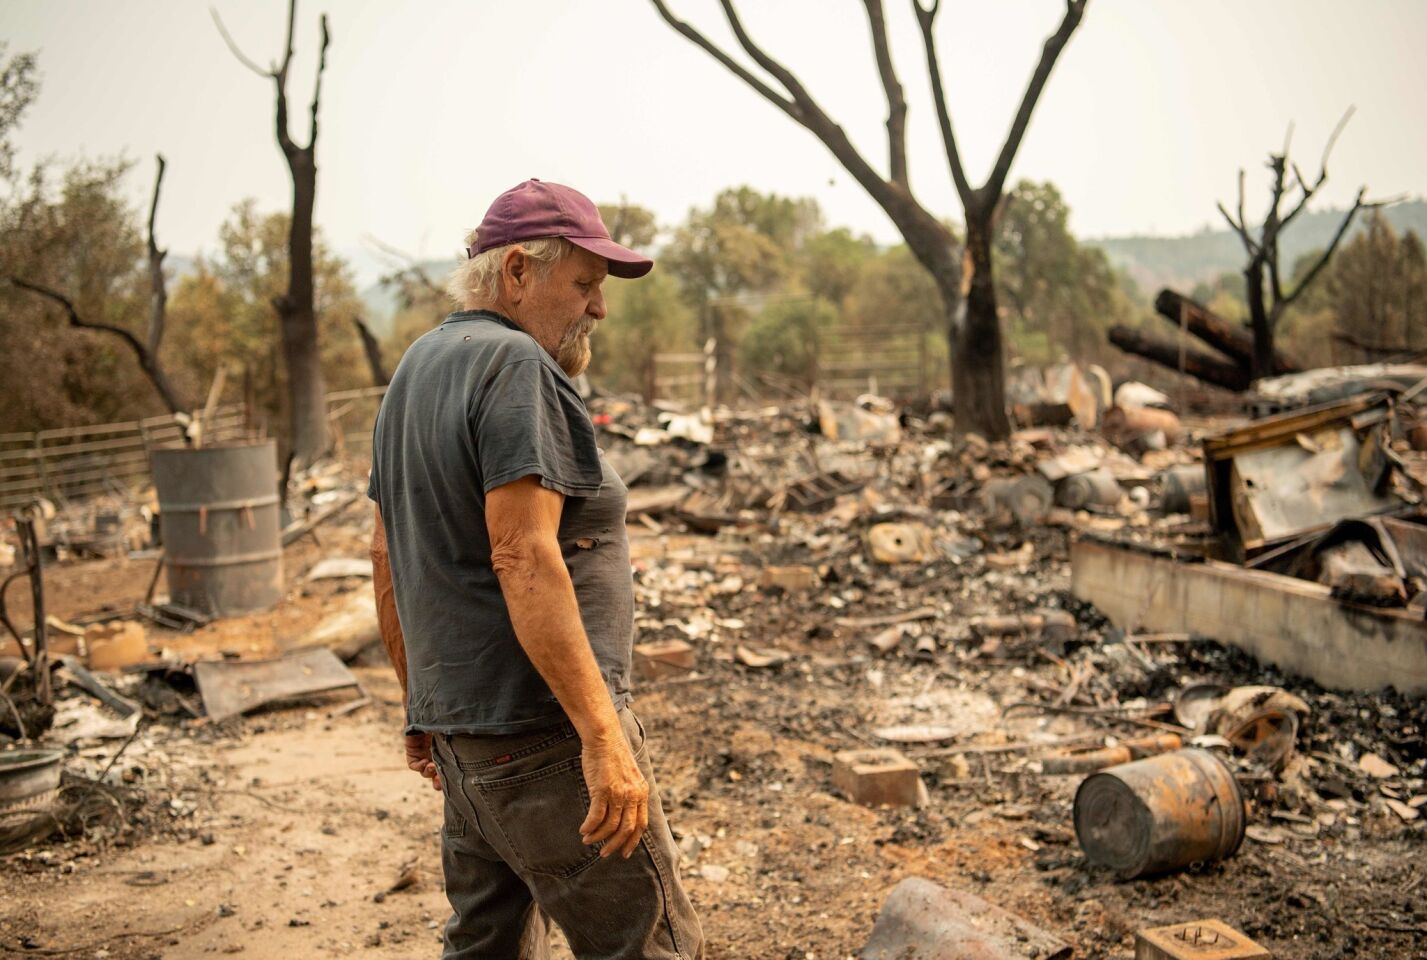 Arnold Lasker looks over the remains of his girlfriend's house in Spring Valley, near Clearlake Oaks, on Aug. 7.